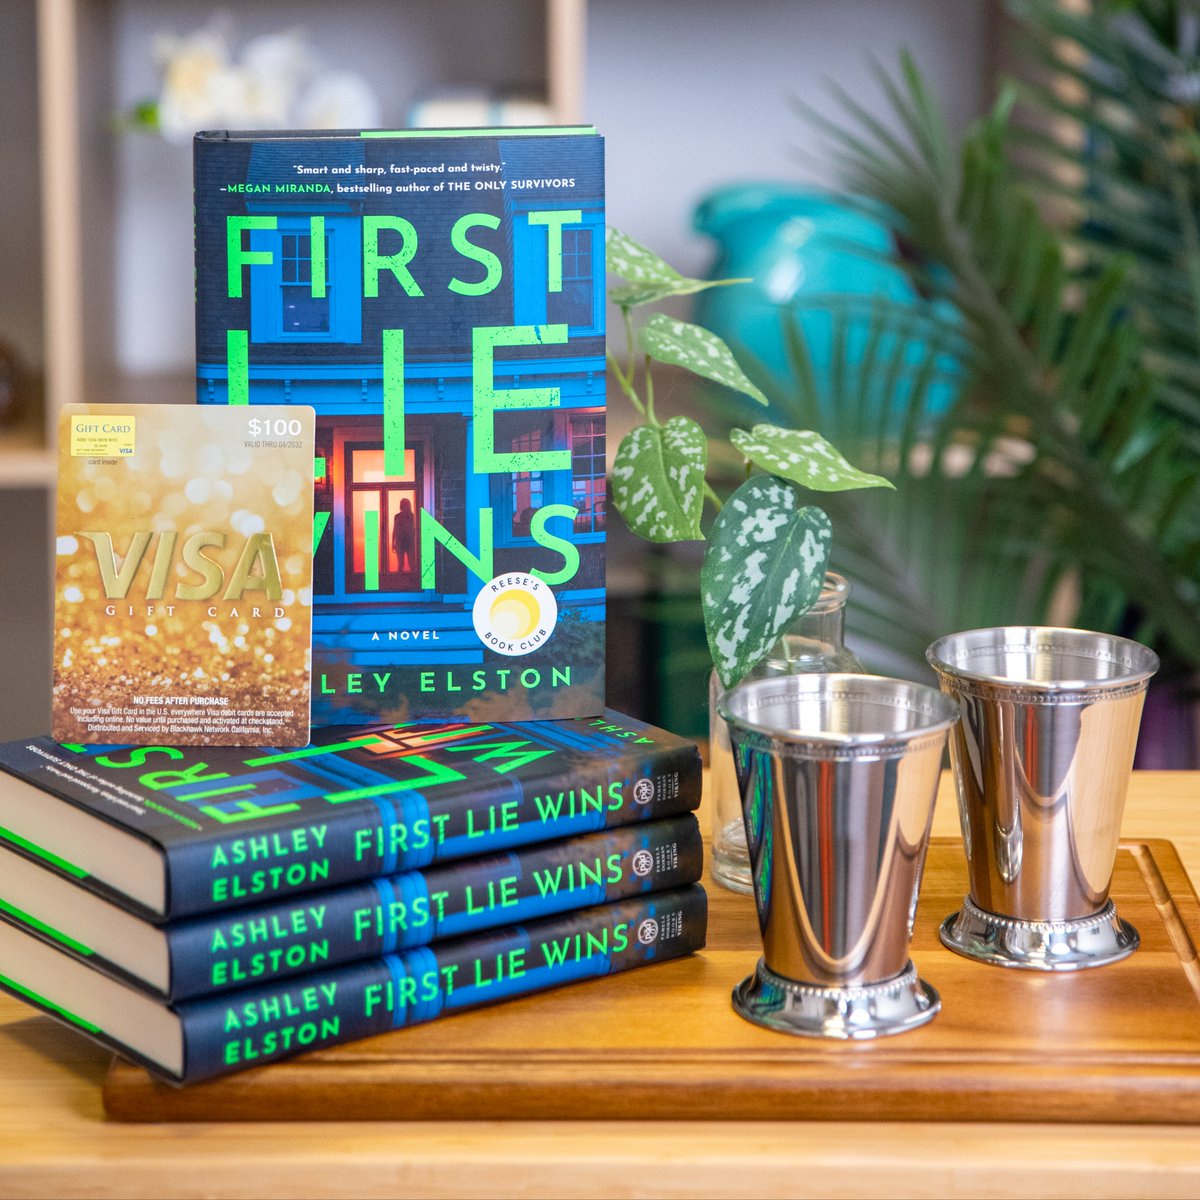 LAST CHANCE to enter our ultimate book club sweepstakes for a chance to win 10 signed copies of the #1 NYT bestseller First Lie Wins by @ashley_elston, a book club kit, Q&A with the author, mint julep cups and recipe, and a $100 VISA Gift Card! ⁣👉 bit.ly/49OpOX7